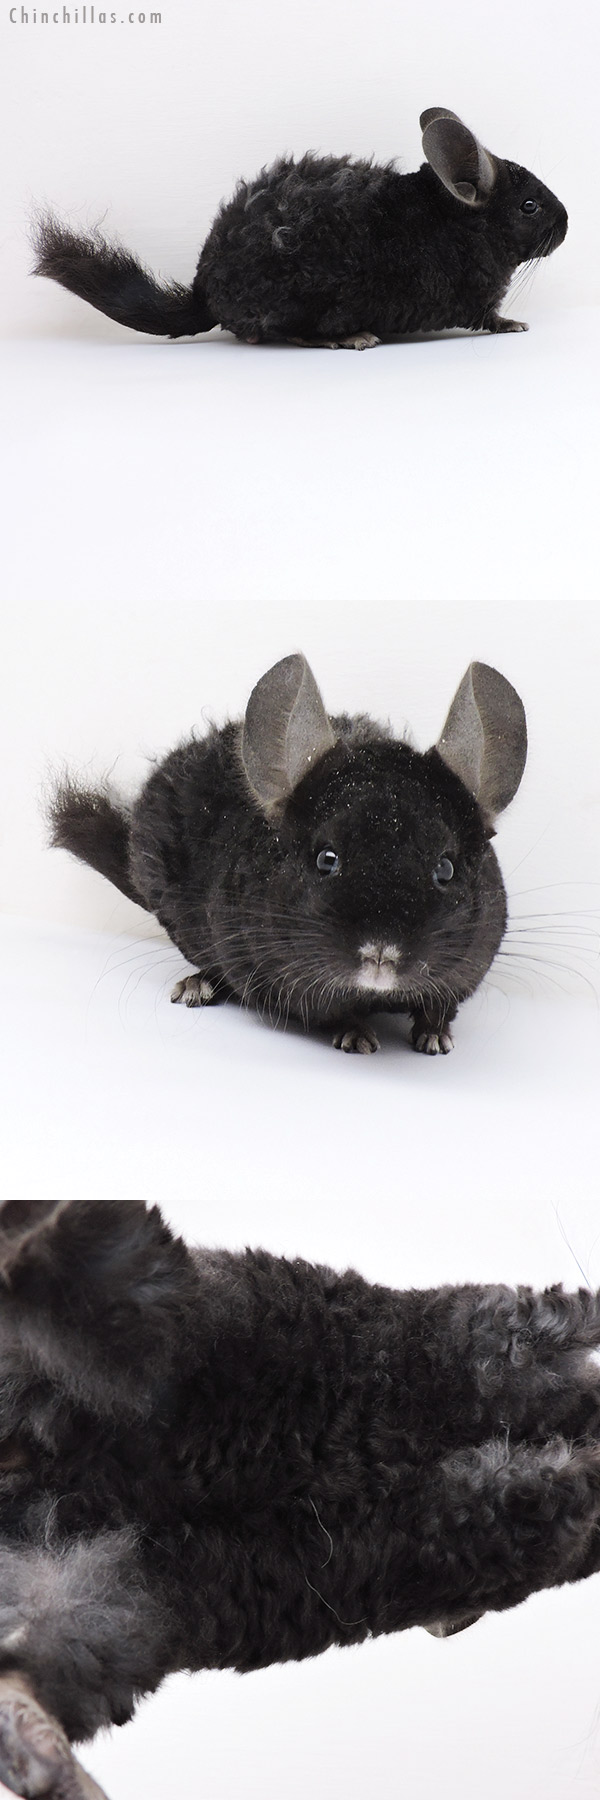 Chinchilla or related item offered for sale or export on Chinchillas.com - 19148 Ebony Full Locken Male Chinchilla